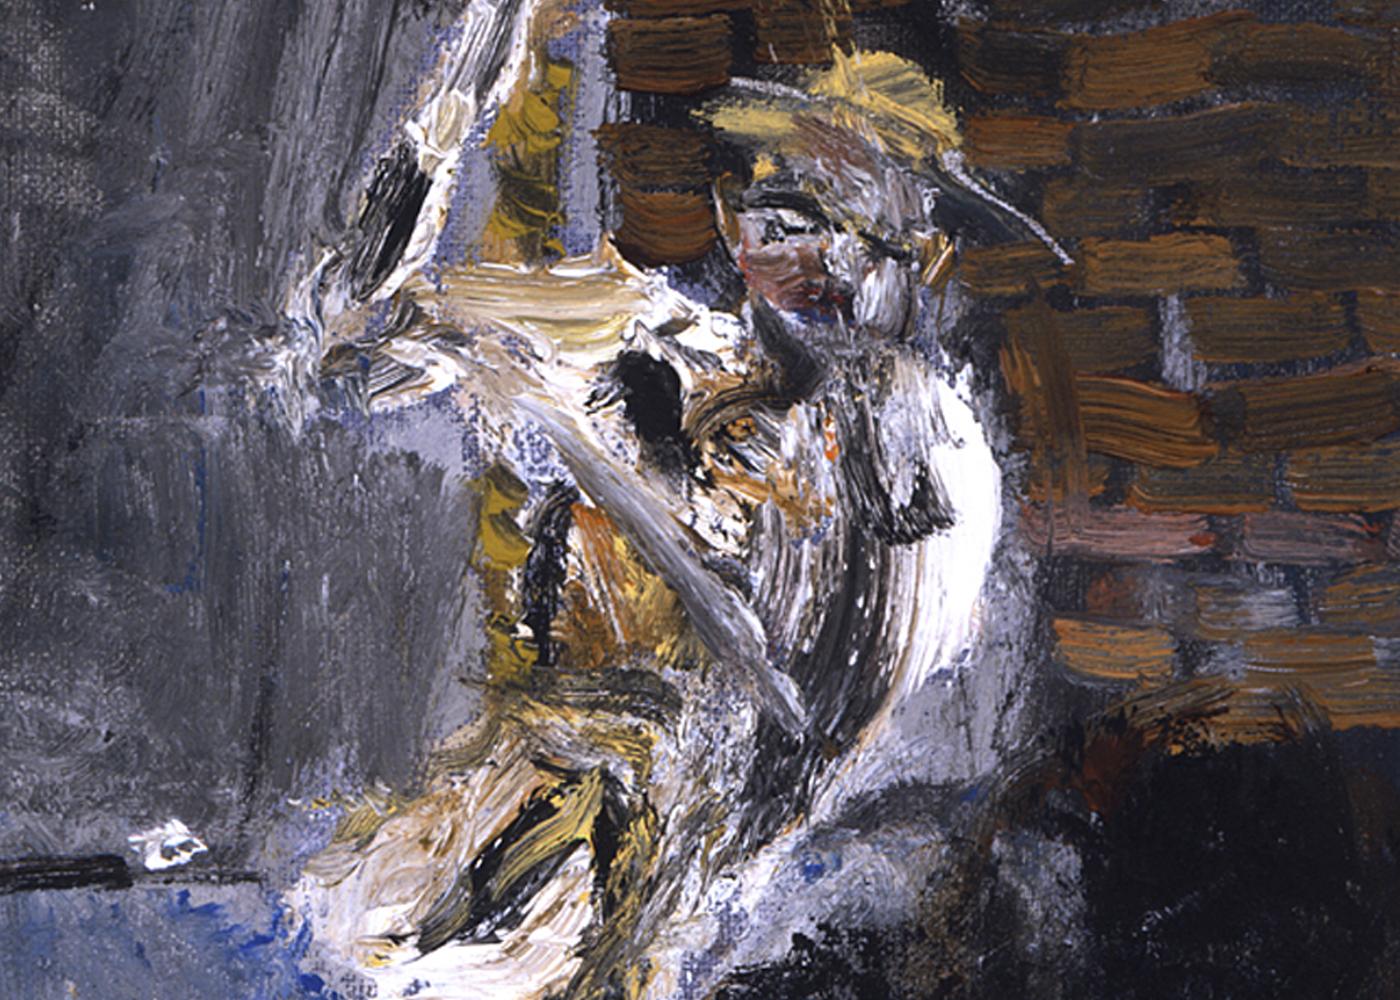 Escape. War painting, man trying to escape, tunnel, Holocaust related - Expressionist Painting by Michael Hafftka